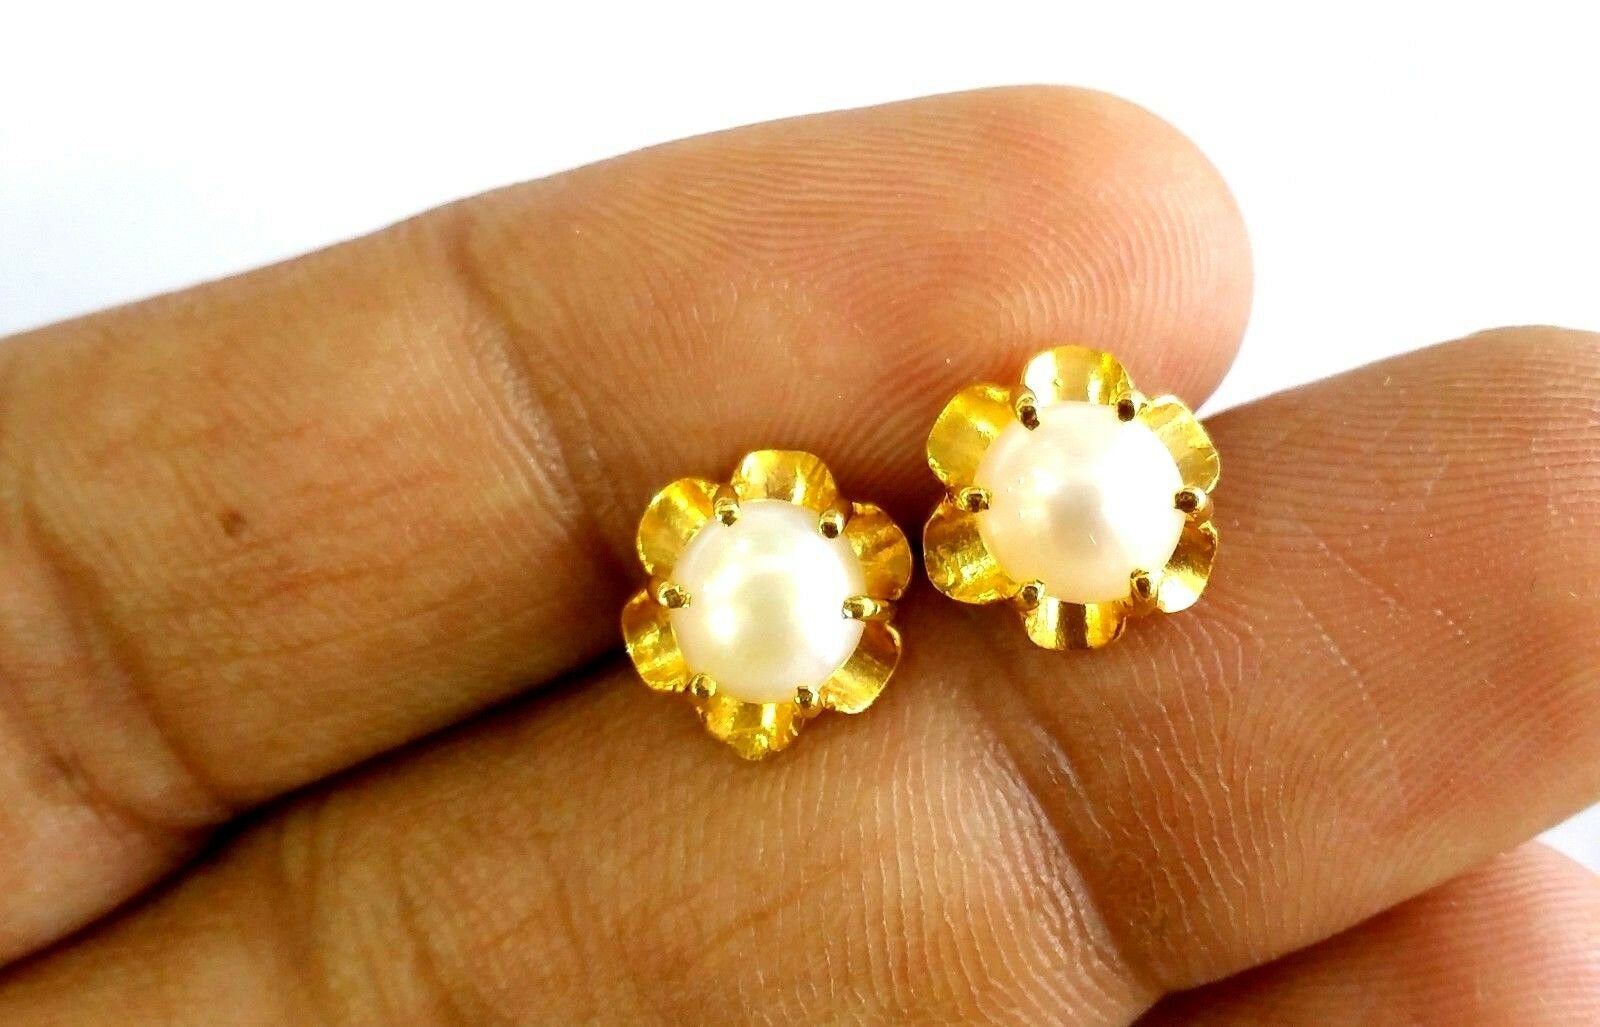 Designer Contemporary Pearl Stud Earrings For Weddings And Parties By Gehna  Shop | Earrings, Pearl stud earrings, Pearl studs